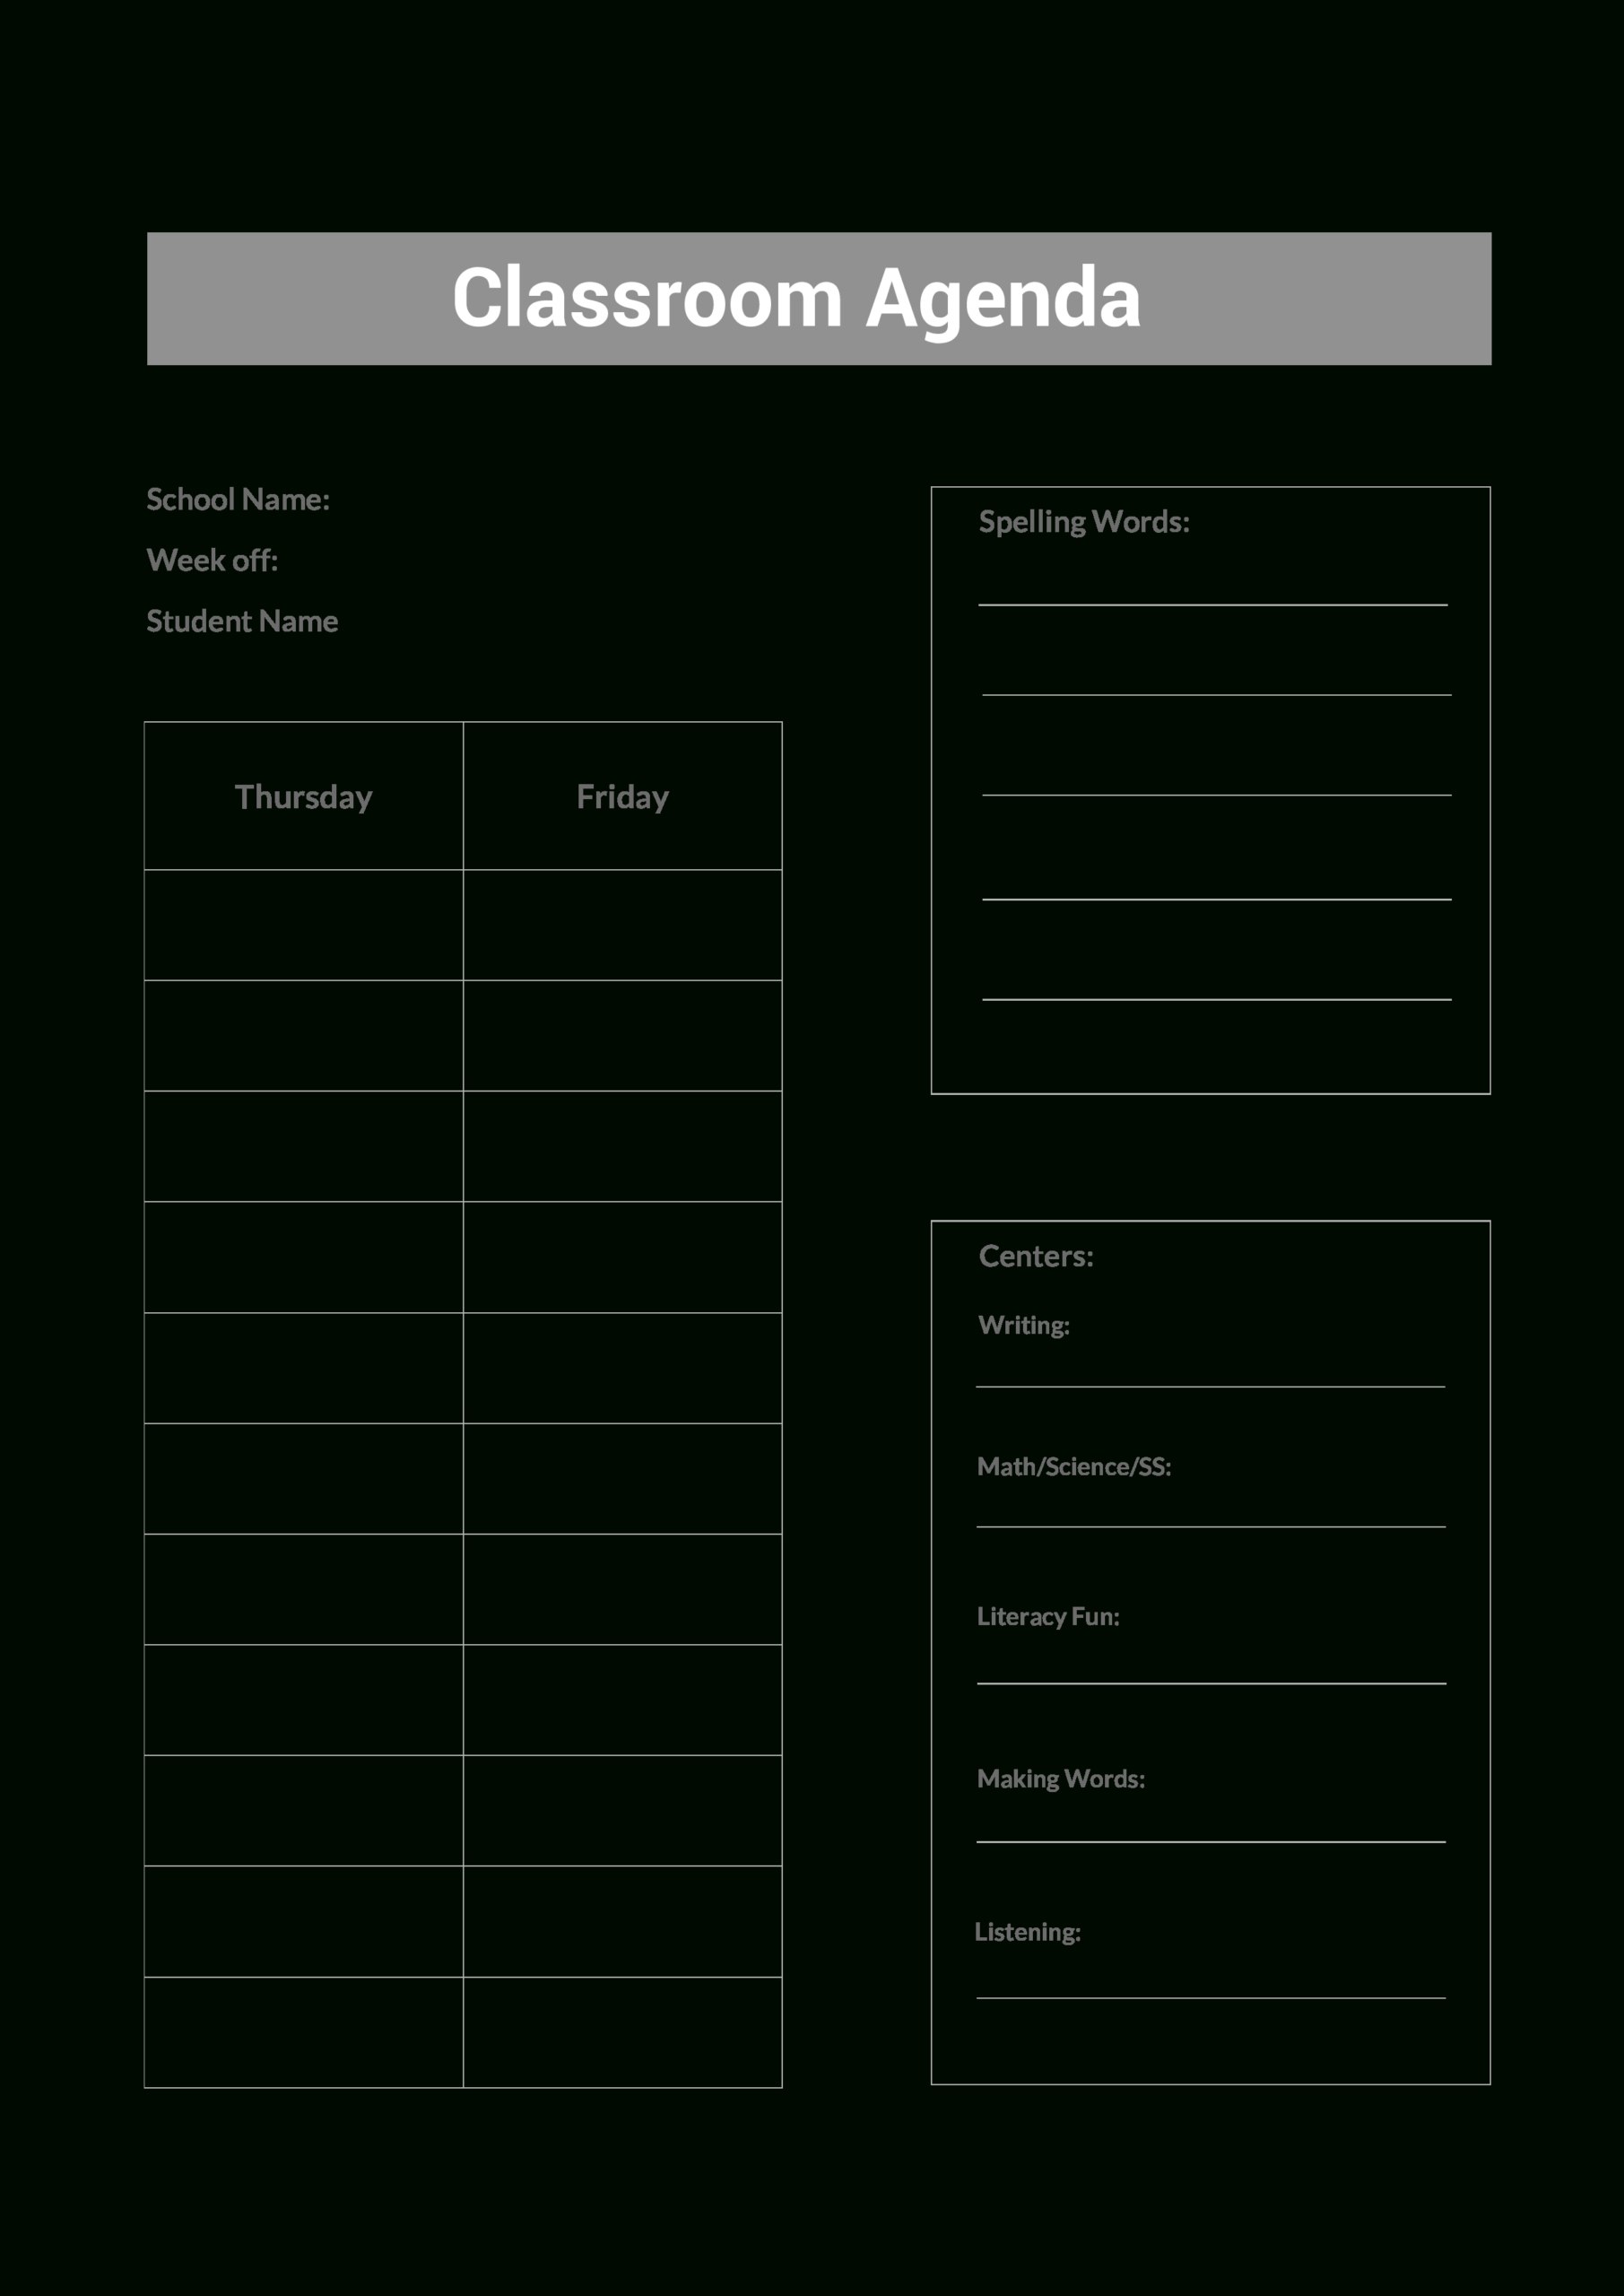 Class Room Agenda | Templates At Allbusinesstemplates For Making Words Template